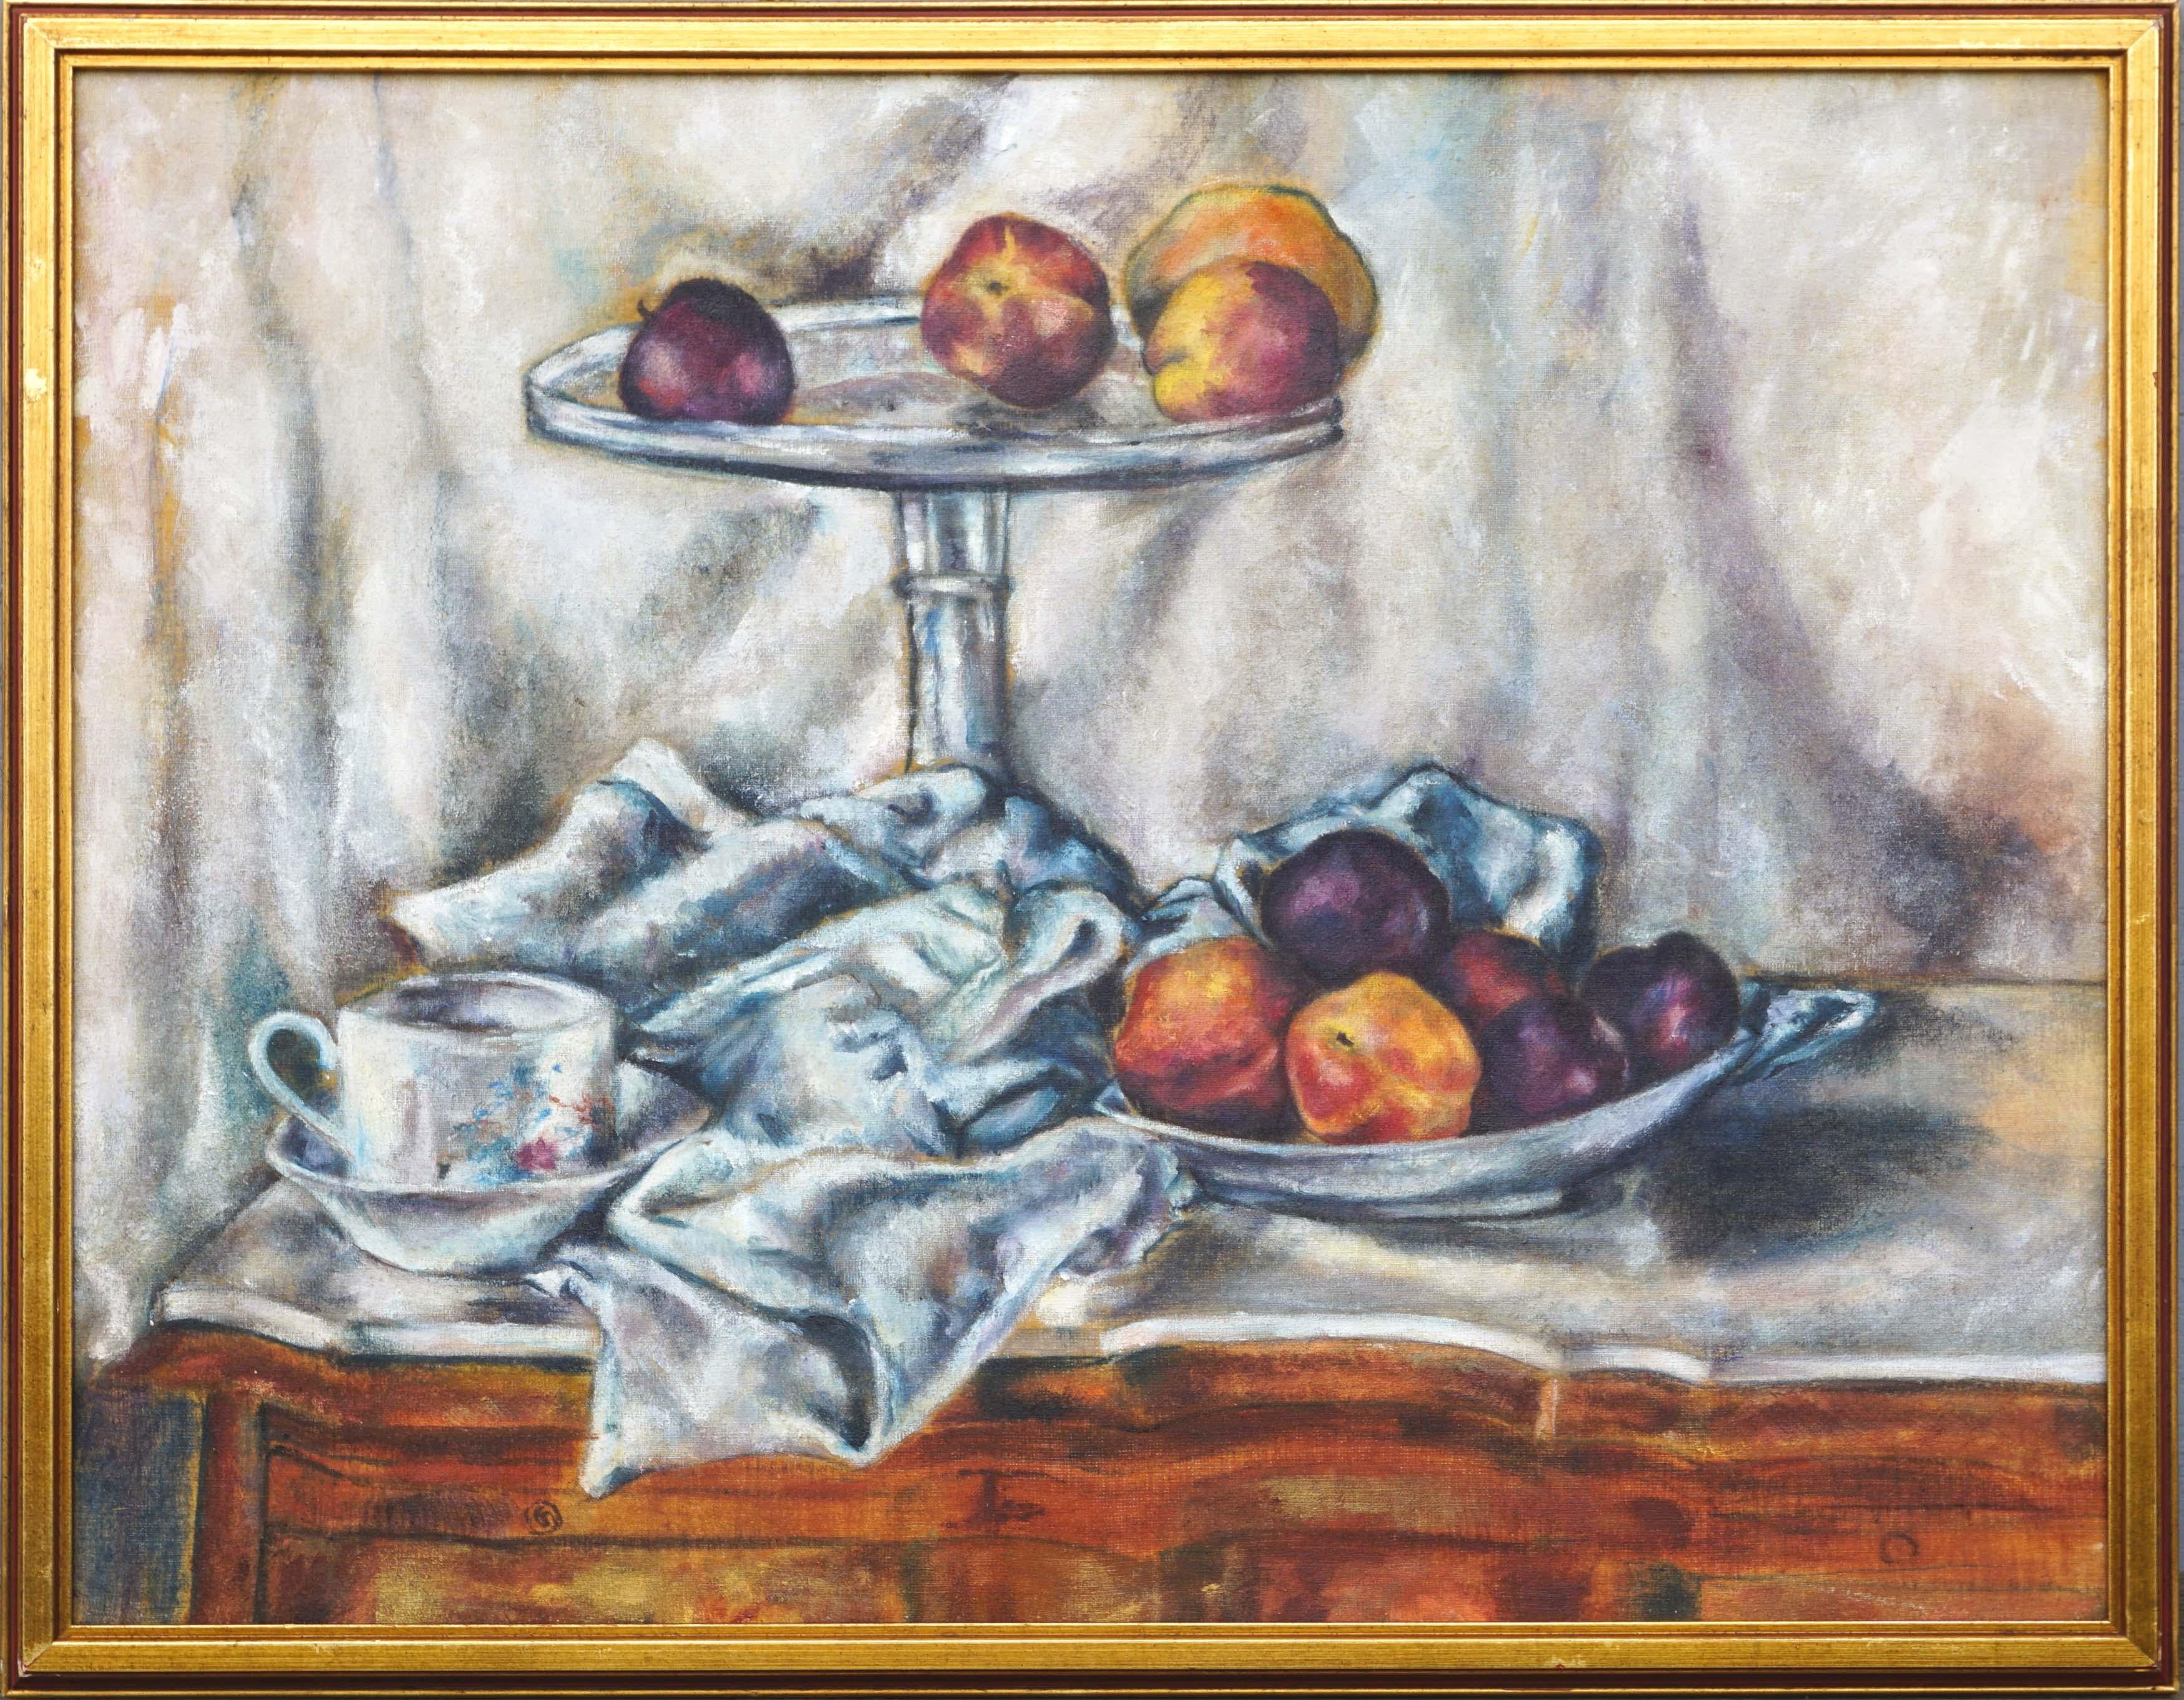 Peaches and Plums Still Life in Style of Paul Cezanne